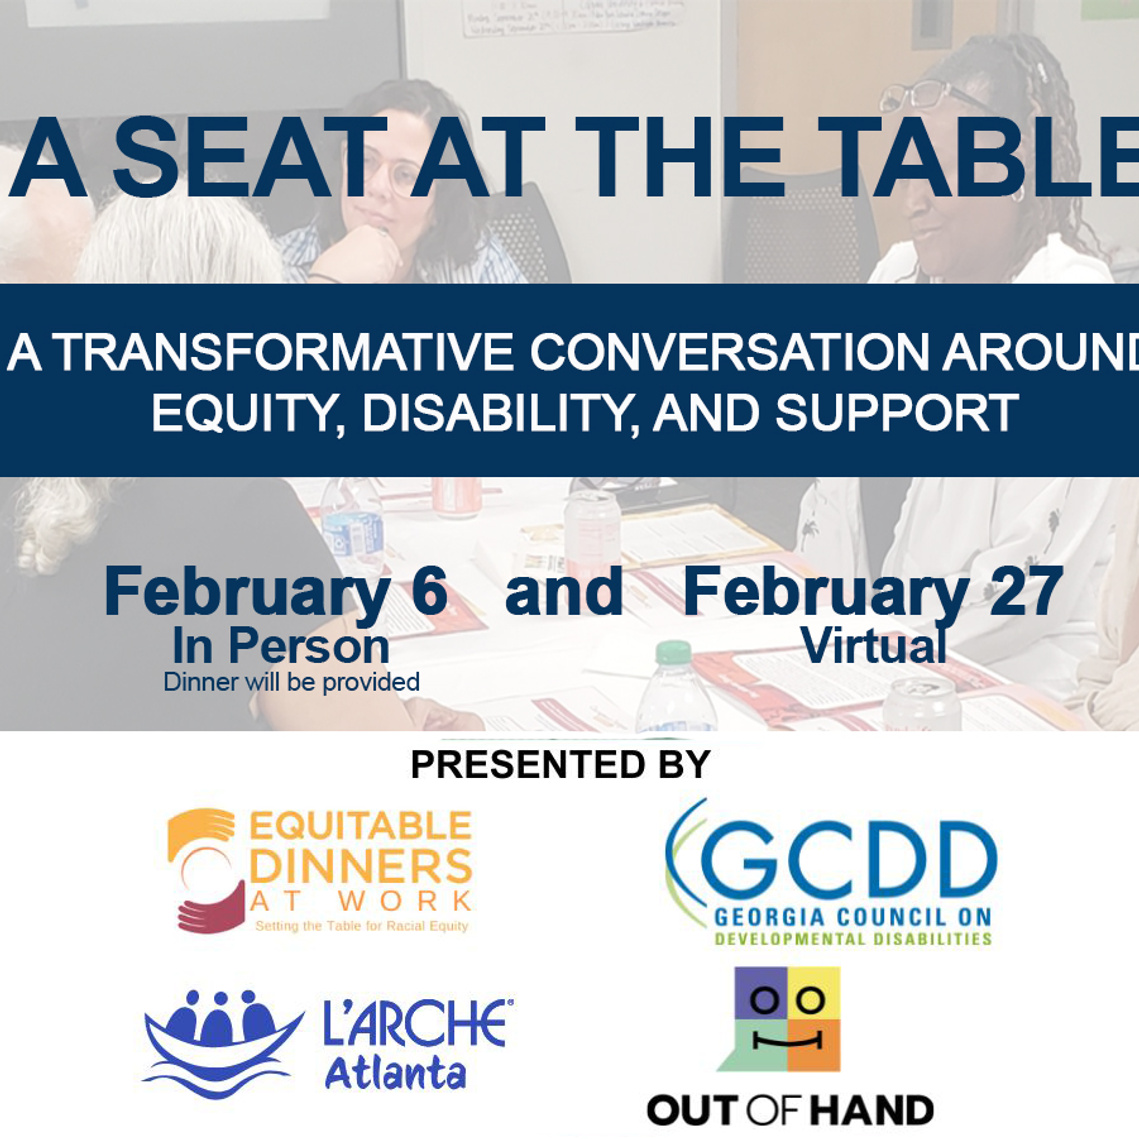 A Seat at the Table February 6 and February 27. Presented by Equitable Dinners, GCDD, L'Arche, and Out of Hand Theatre.